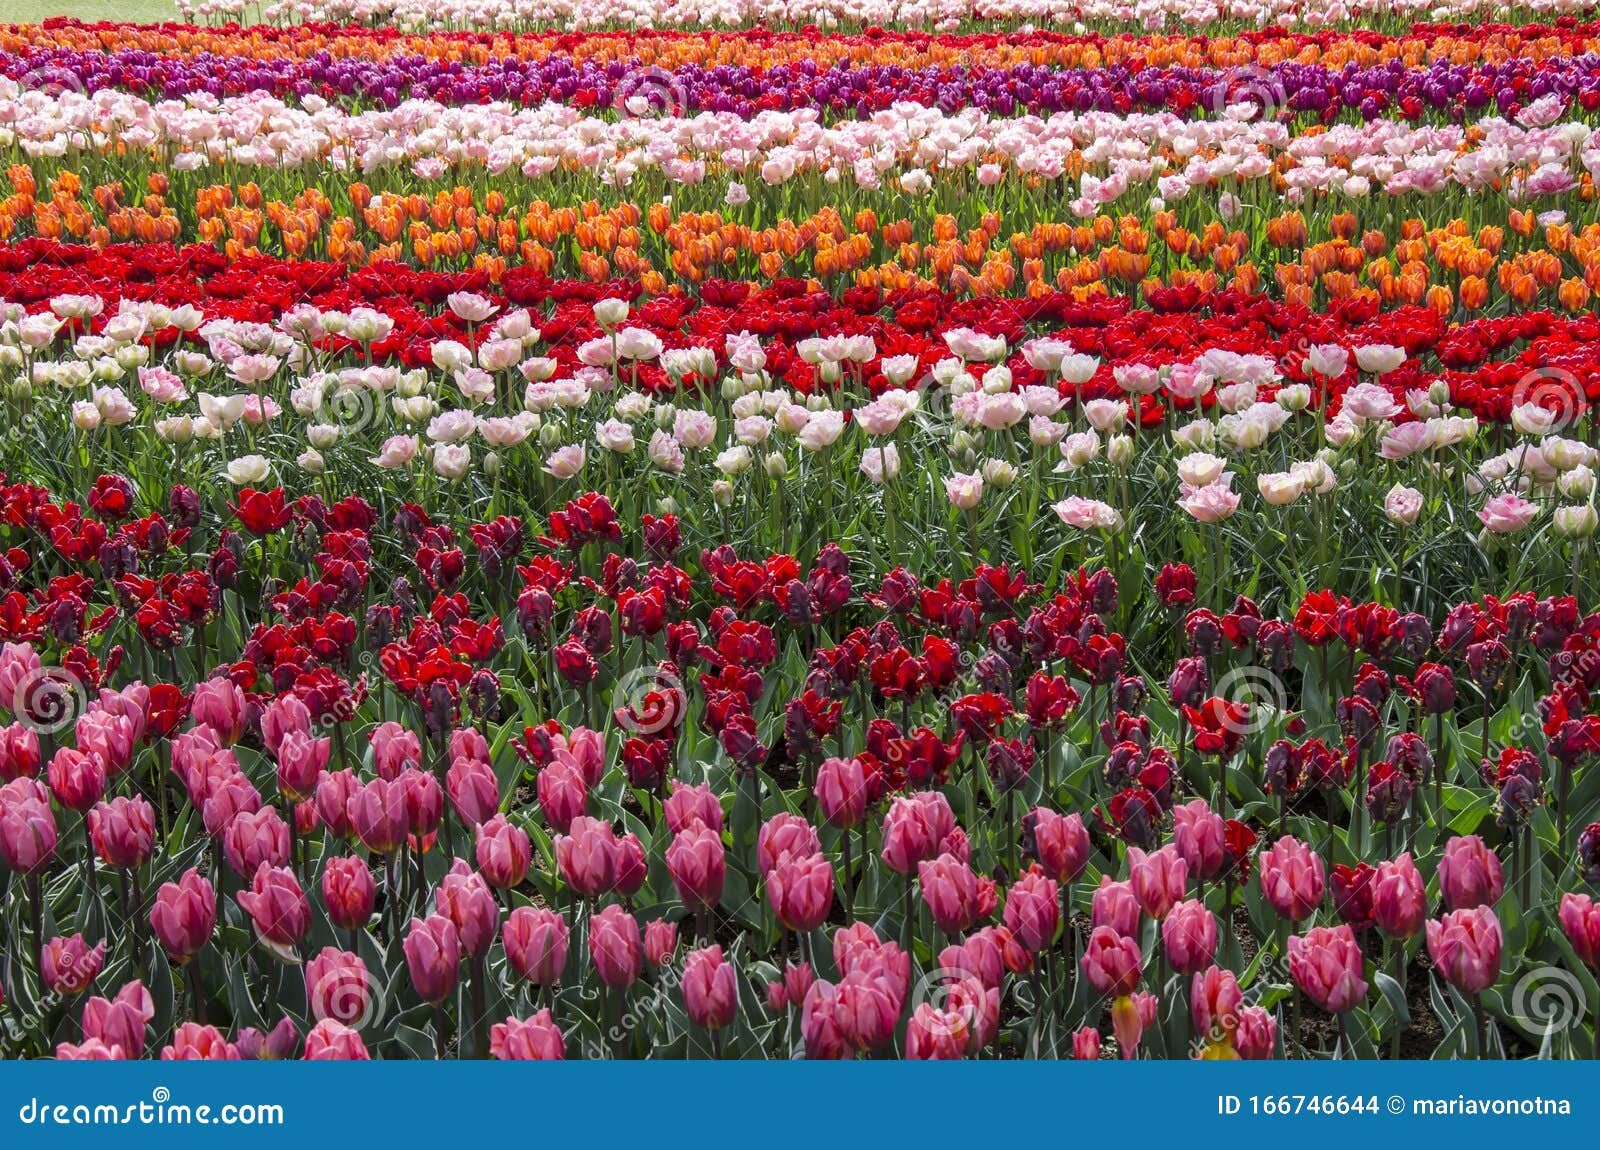 Beautiful Colorful Tulips in Garden Stock Photo - Image of colorful ...